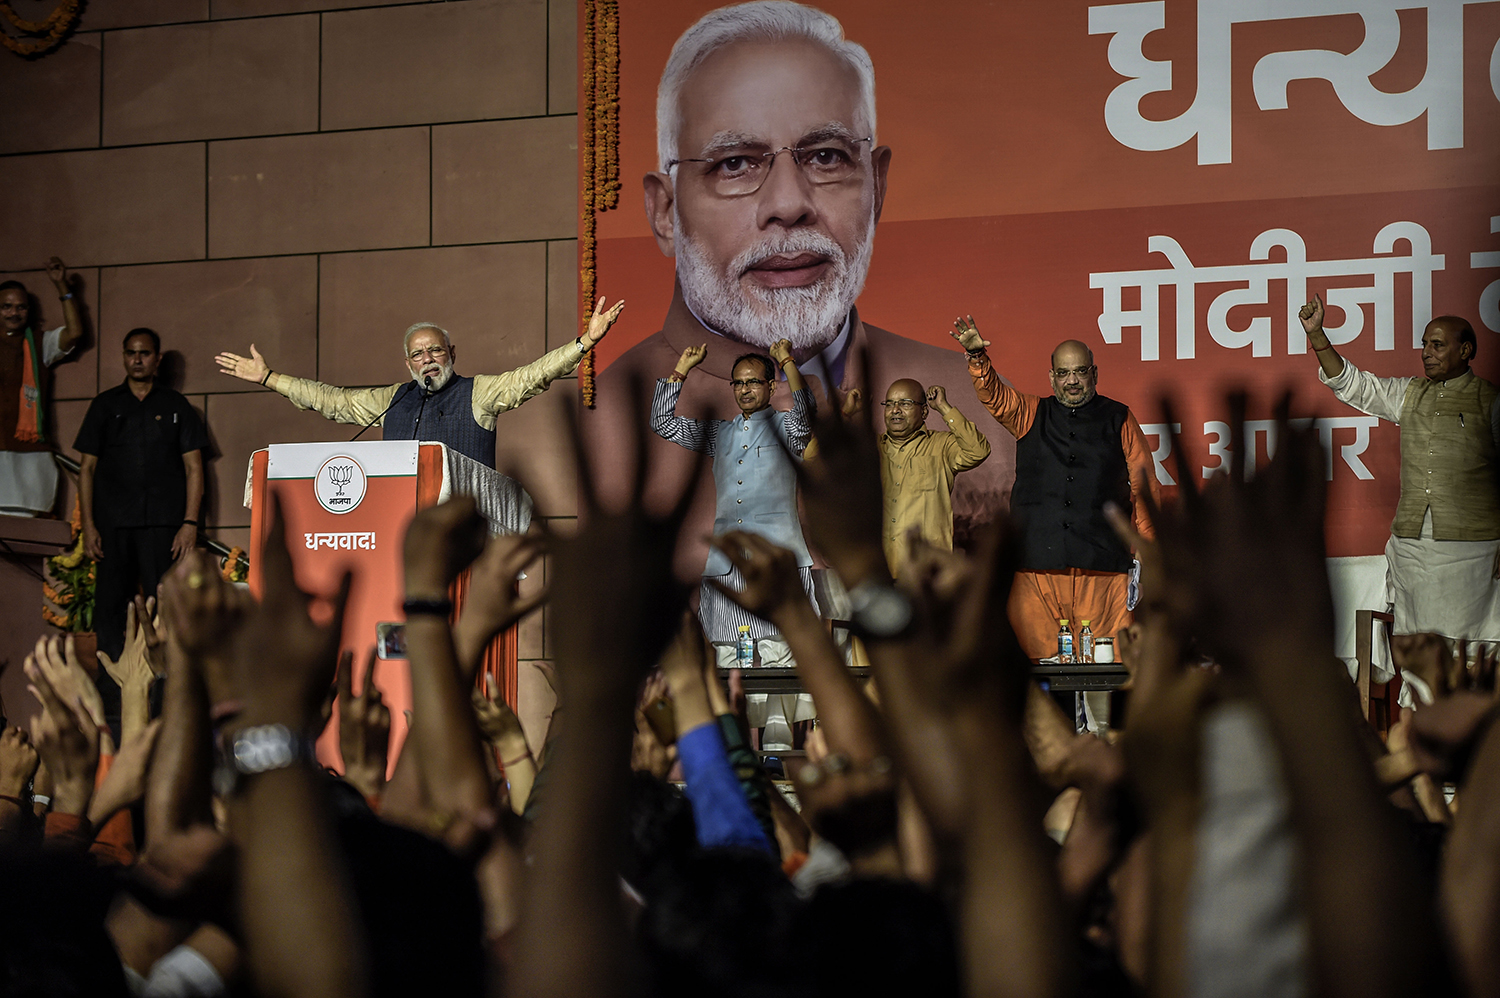 Indian Prime Minister Narendra Modi gestures with his arms wide under a portrait of himself as he addresses a crowd of victorious party workers with their arms raised at the Bharatiya Janata Party headquarters in New Delhi in 2019.